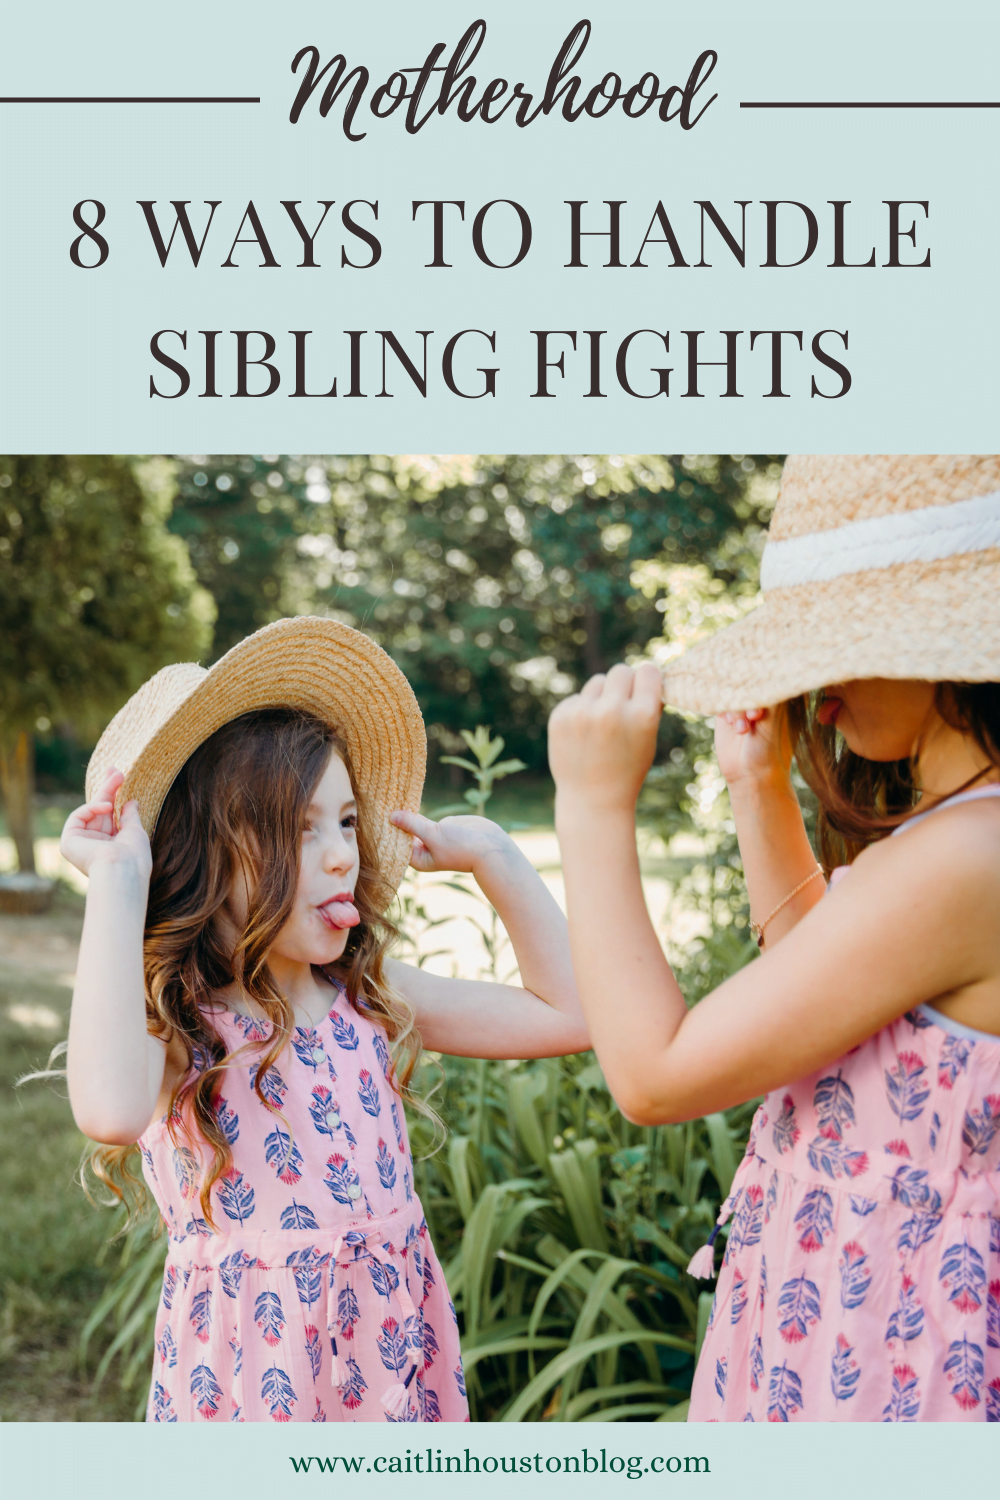 8 Ways to Handle Sibling Fights